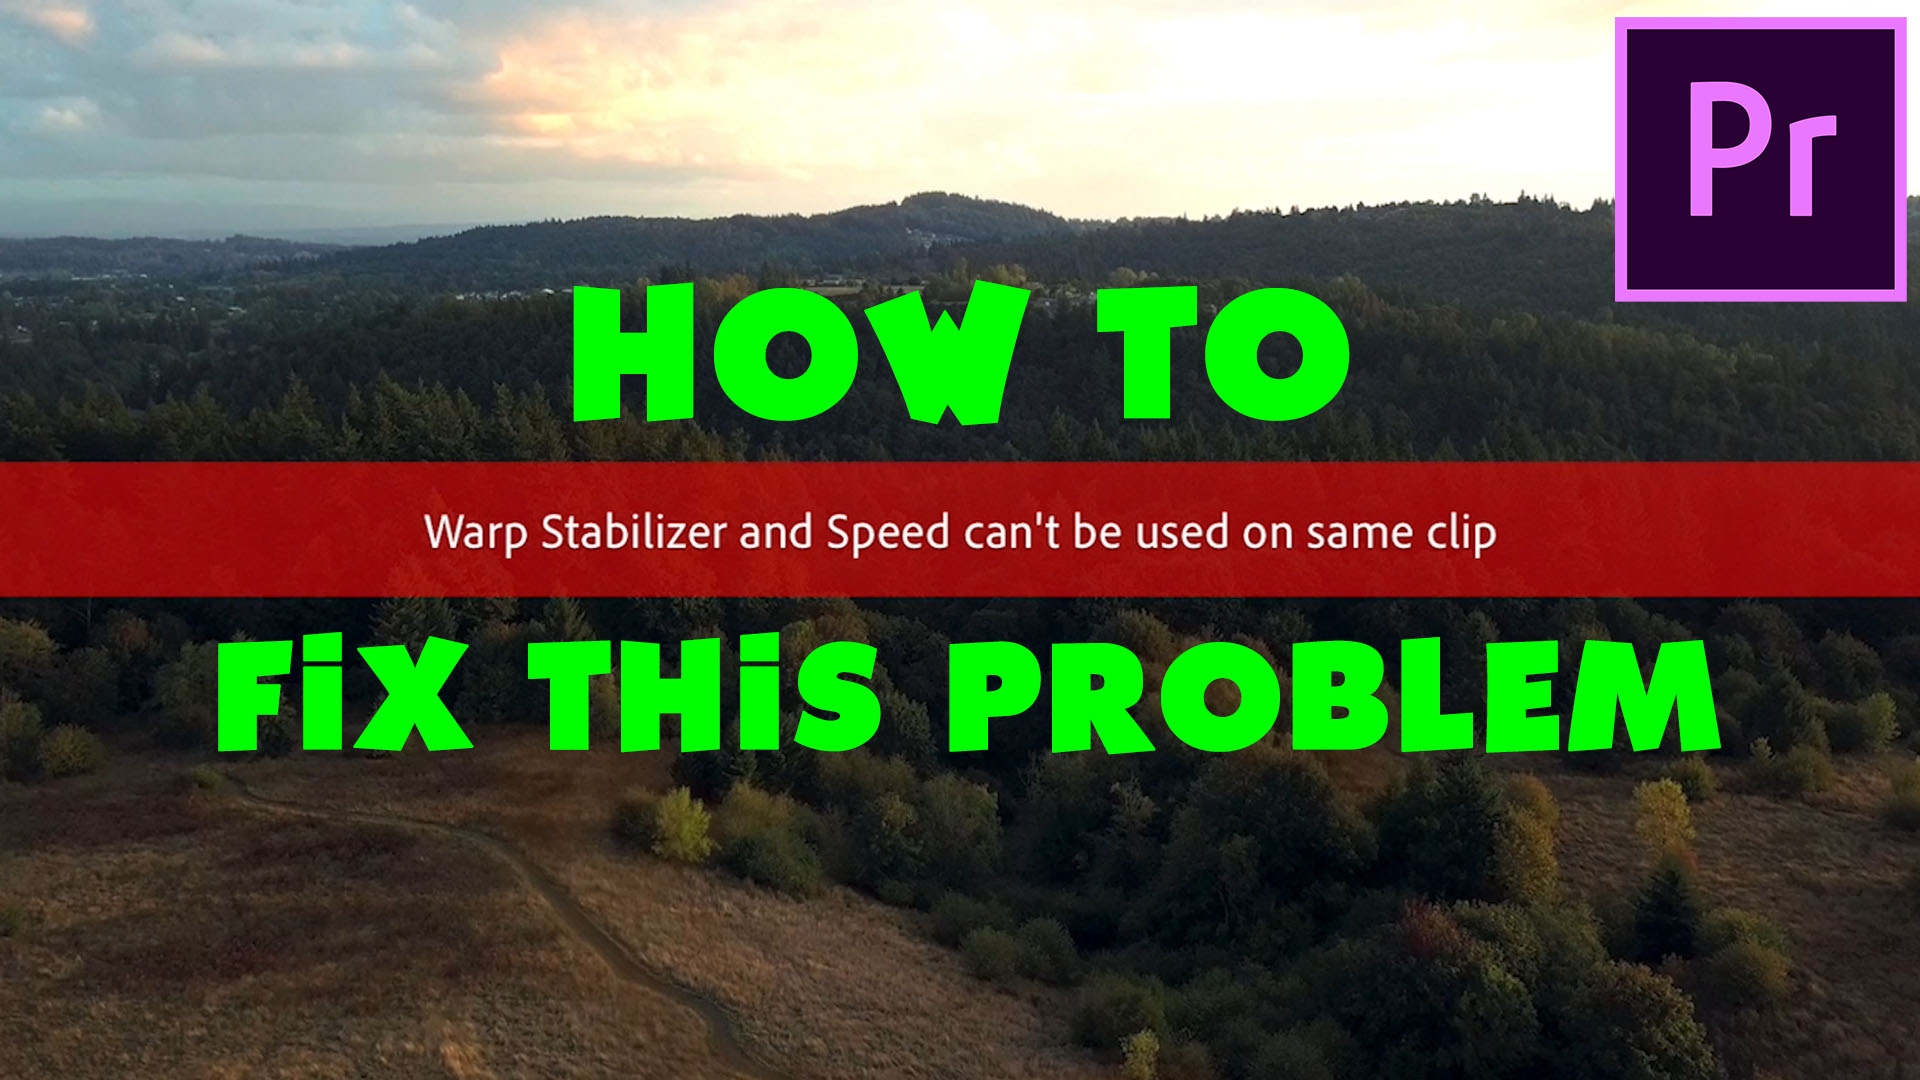 Warp Stabilizer and Speed can